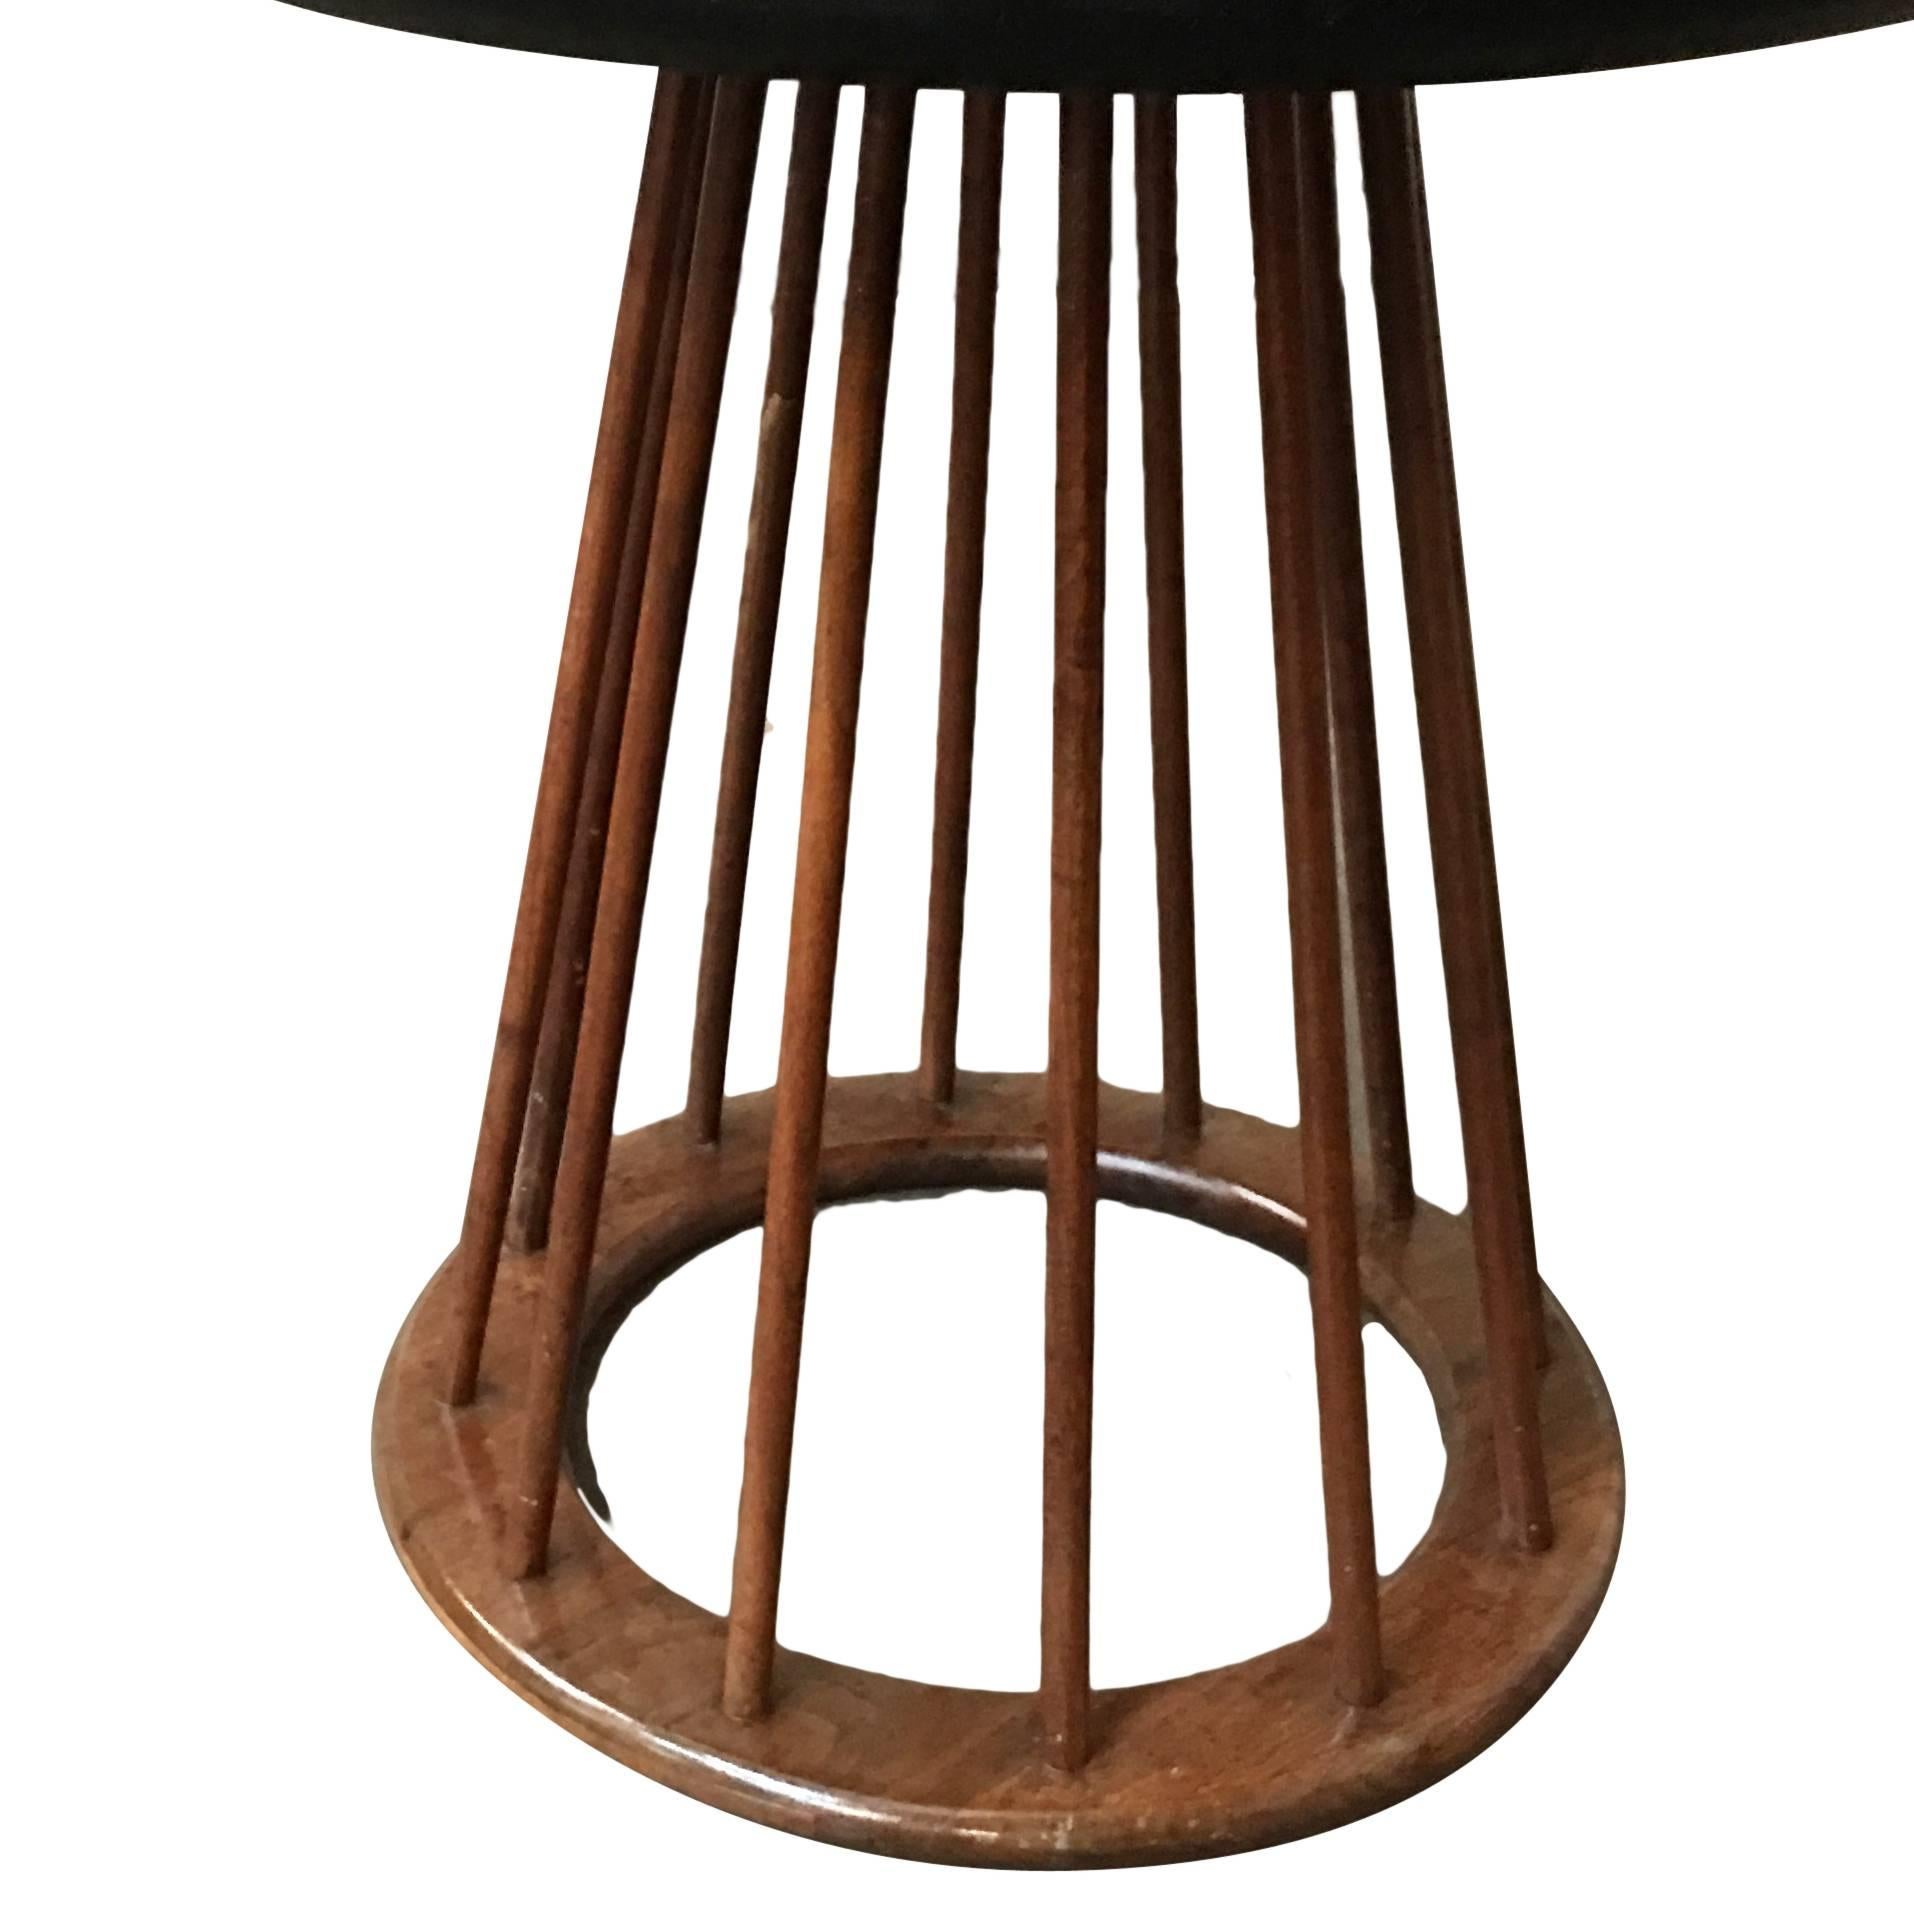 Arthur Umanoff designed spindle side table with black lacquer top made by maker Washington Woodcraft.
 